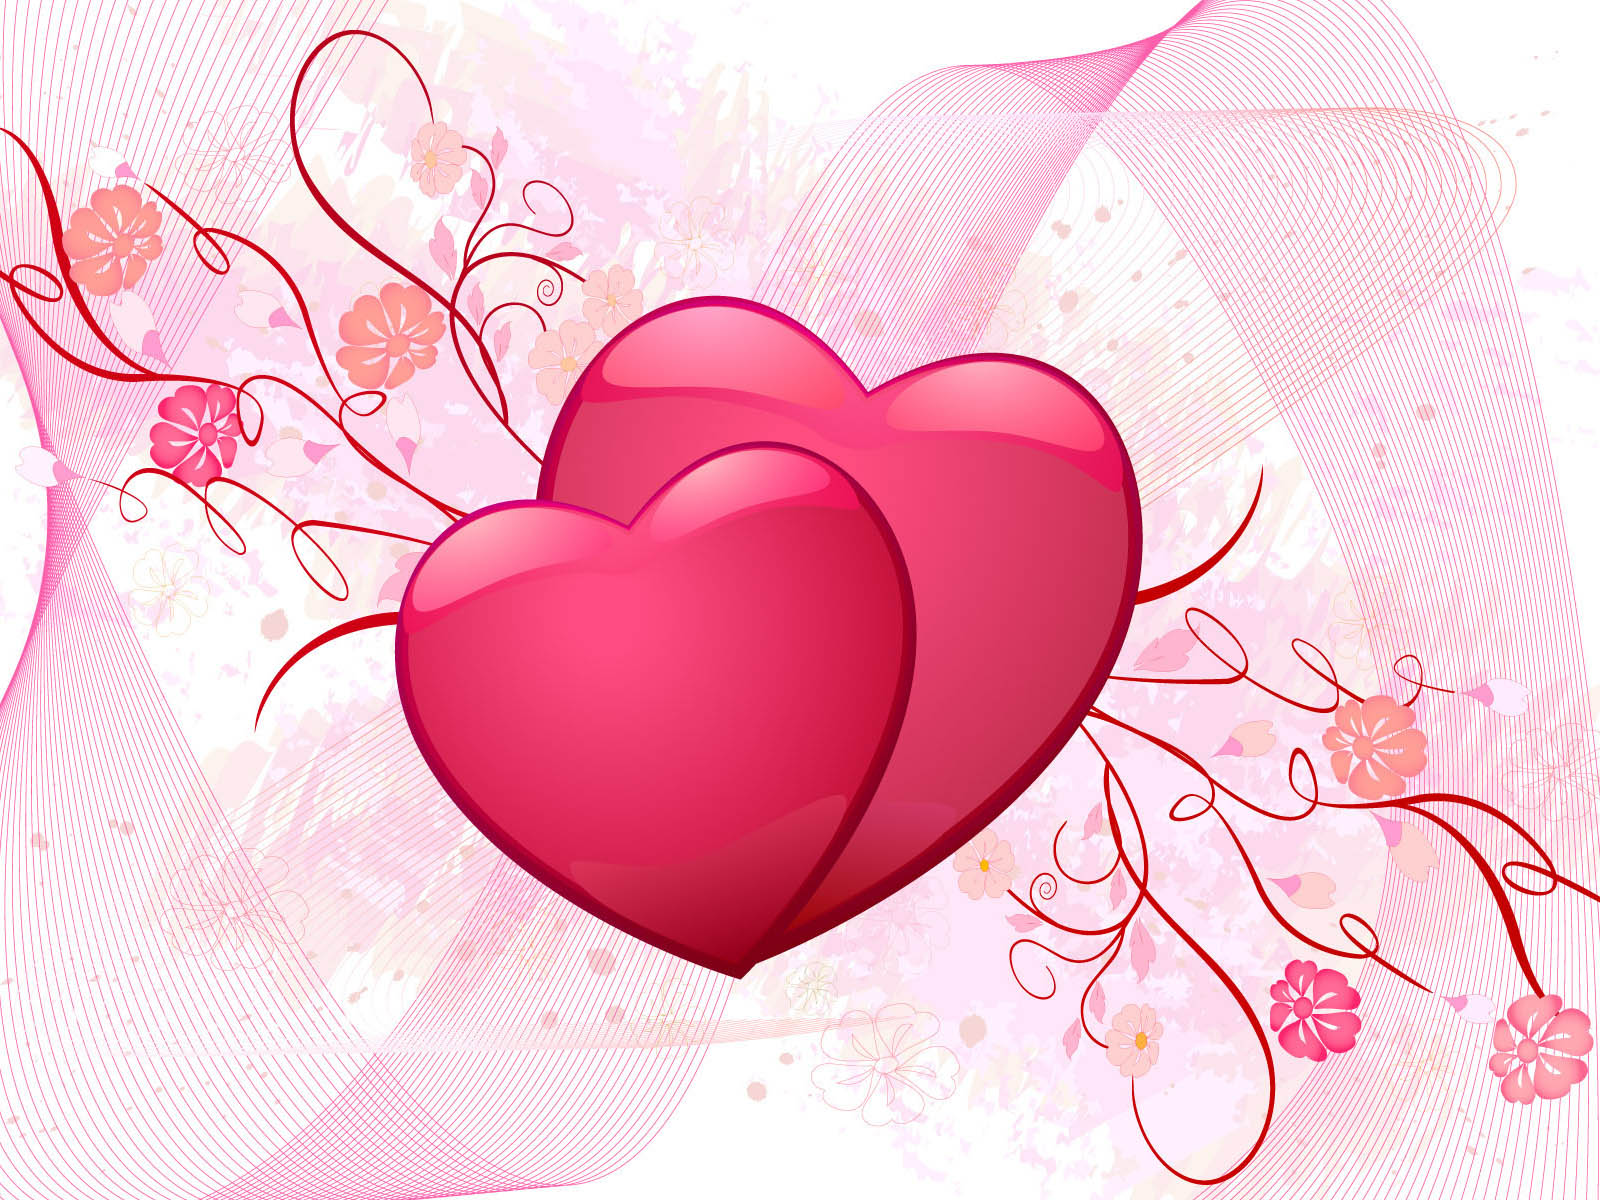  Heart Wallpapers Images Photos Pictures and Backgrounds for free